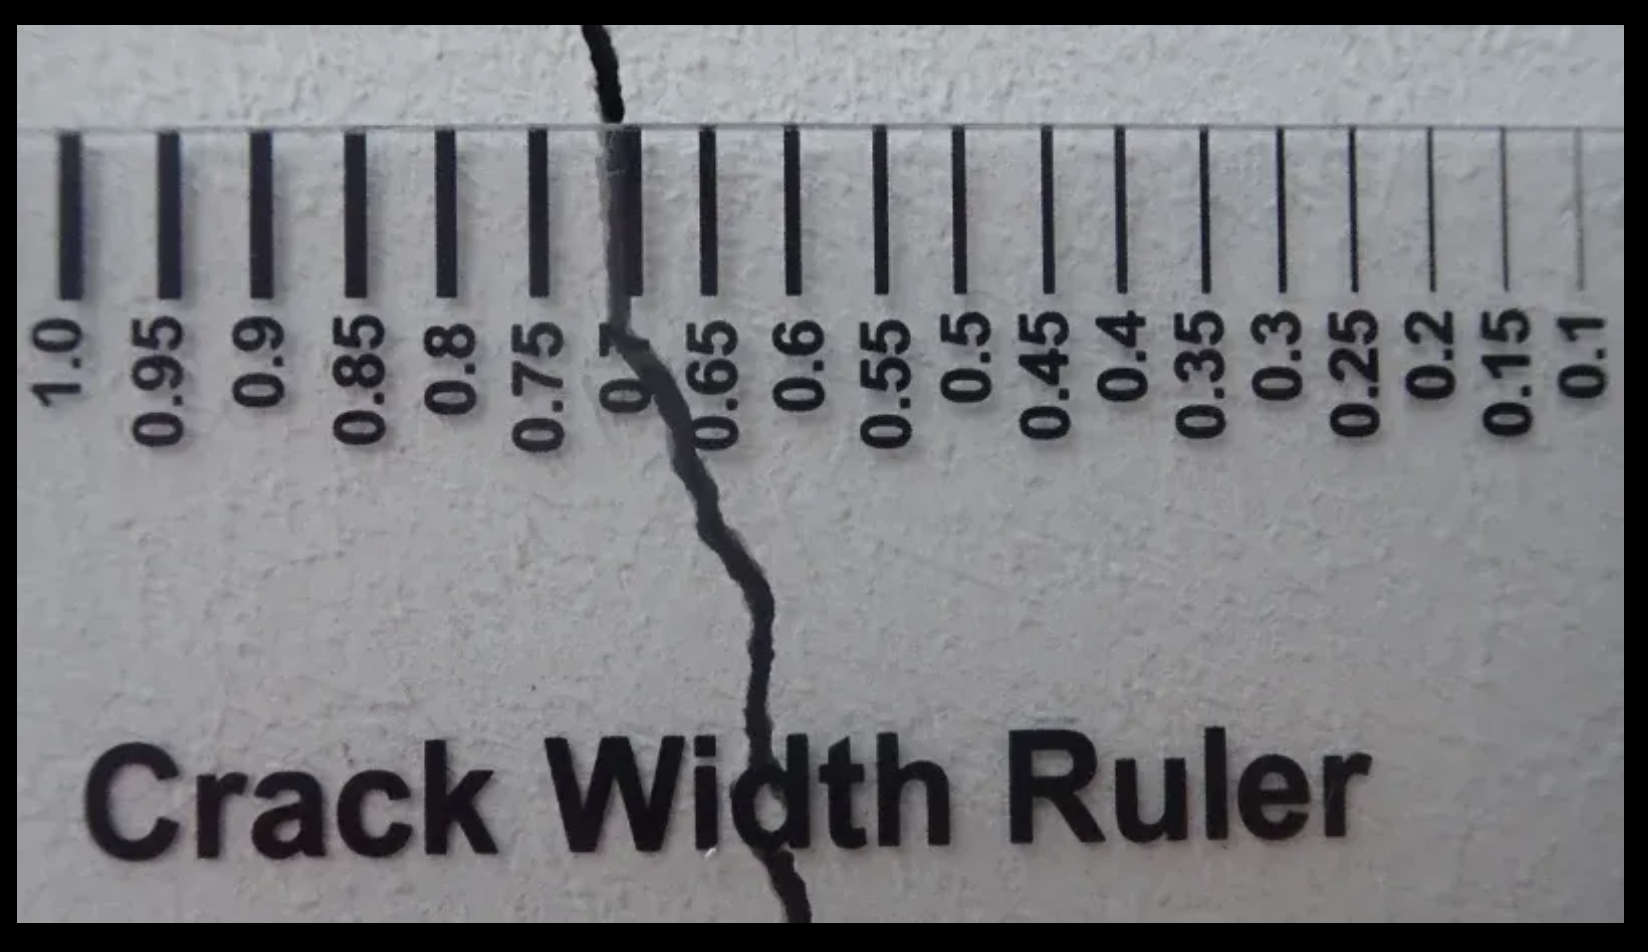 A ruler is used to demonstrate microscope mode